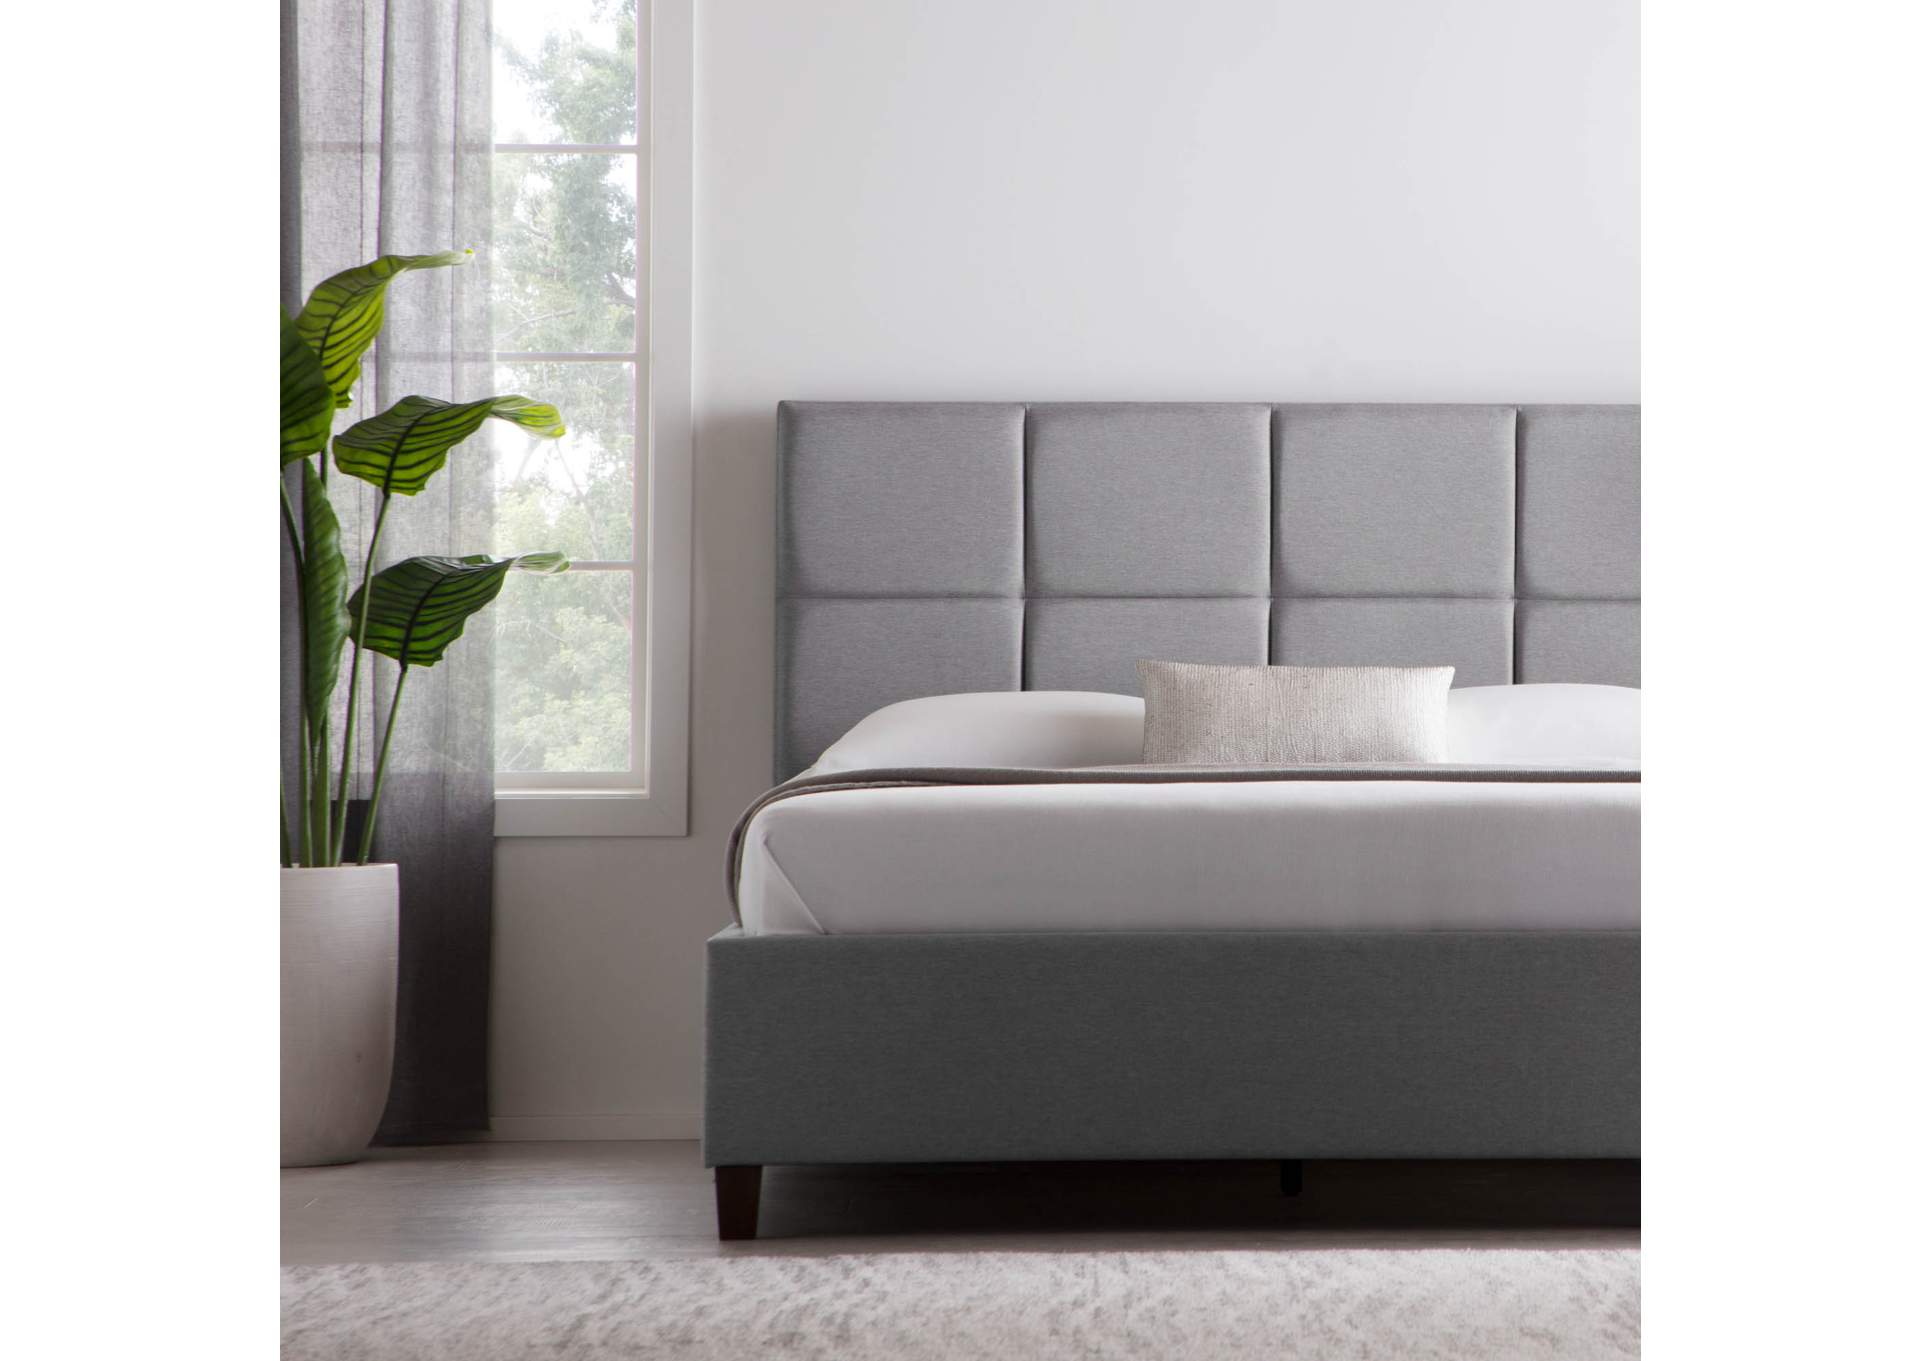 Malouf Charcoal Scoresby Upholstered King Bed,Malouf